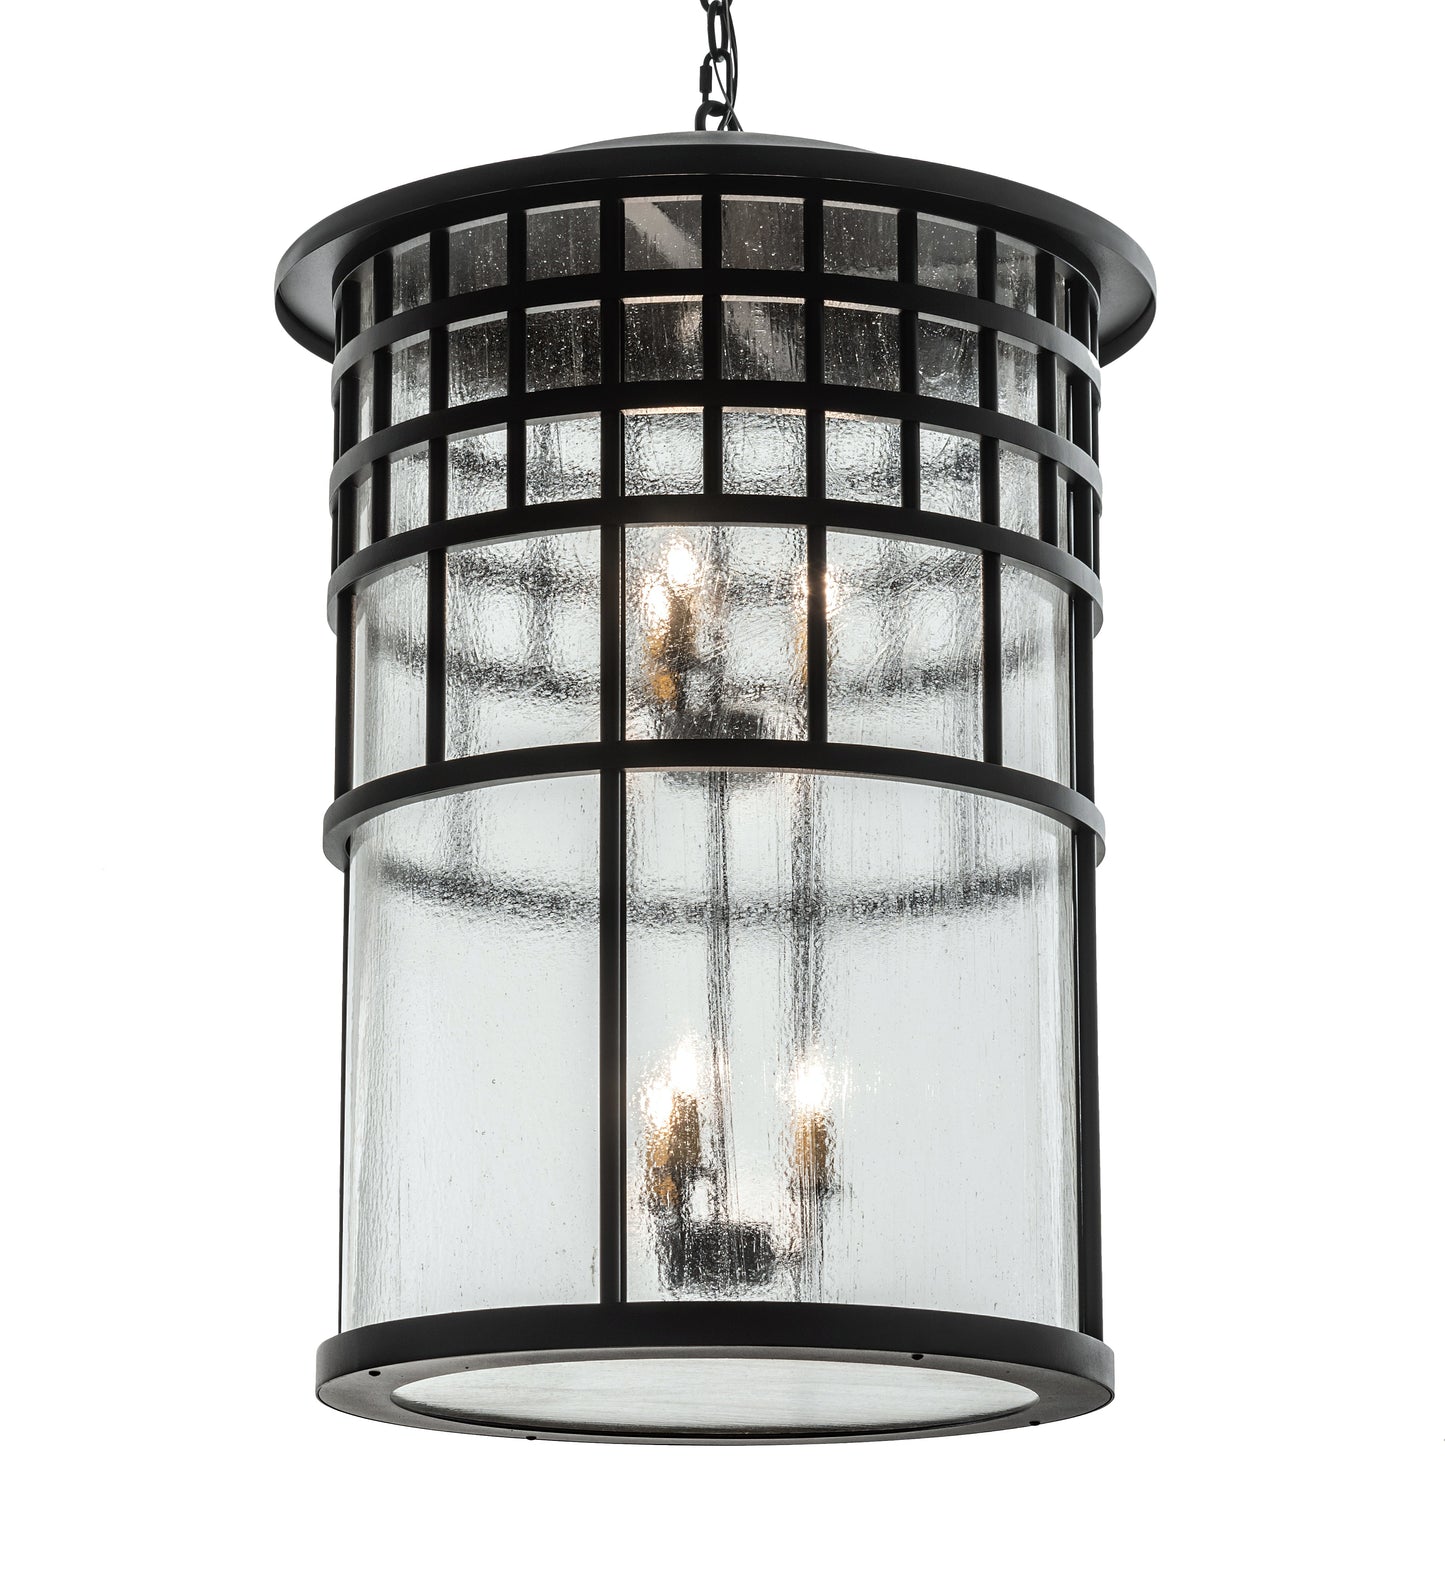 24" Hudson House Pendant by 2nd Ave Lighting